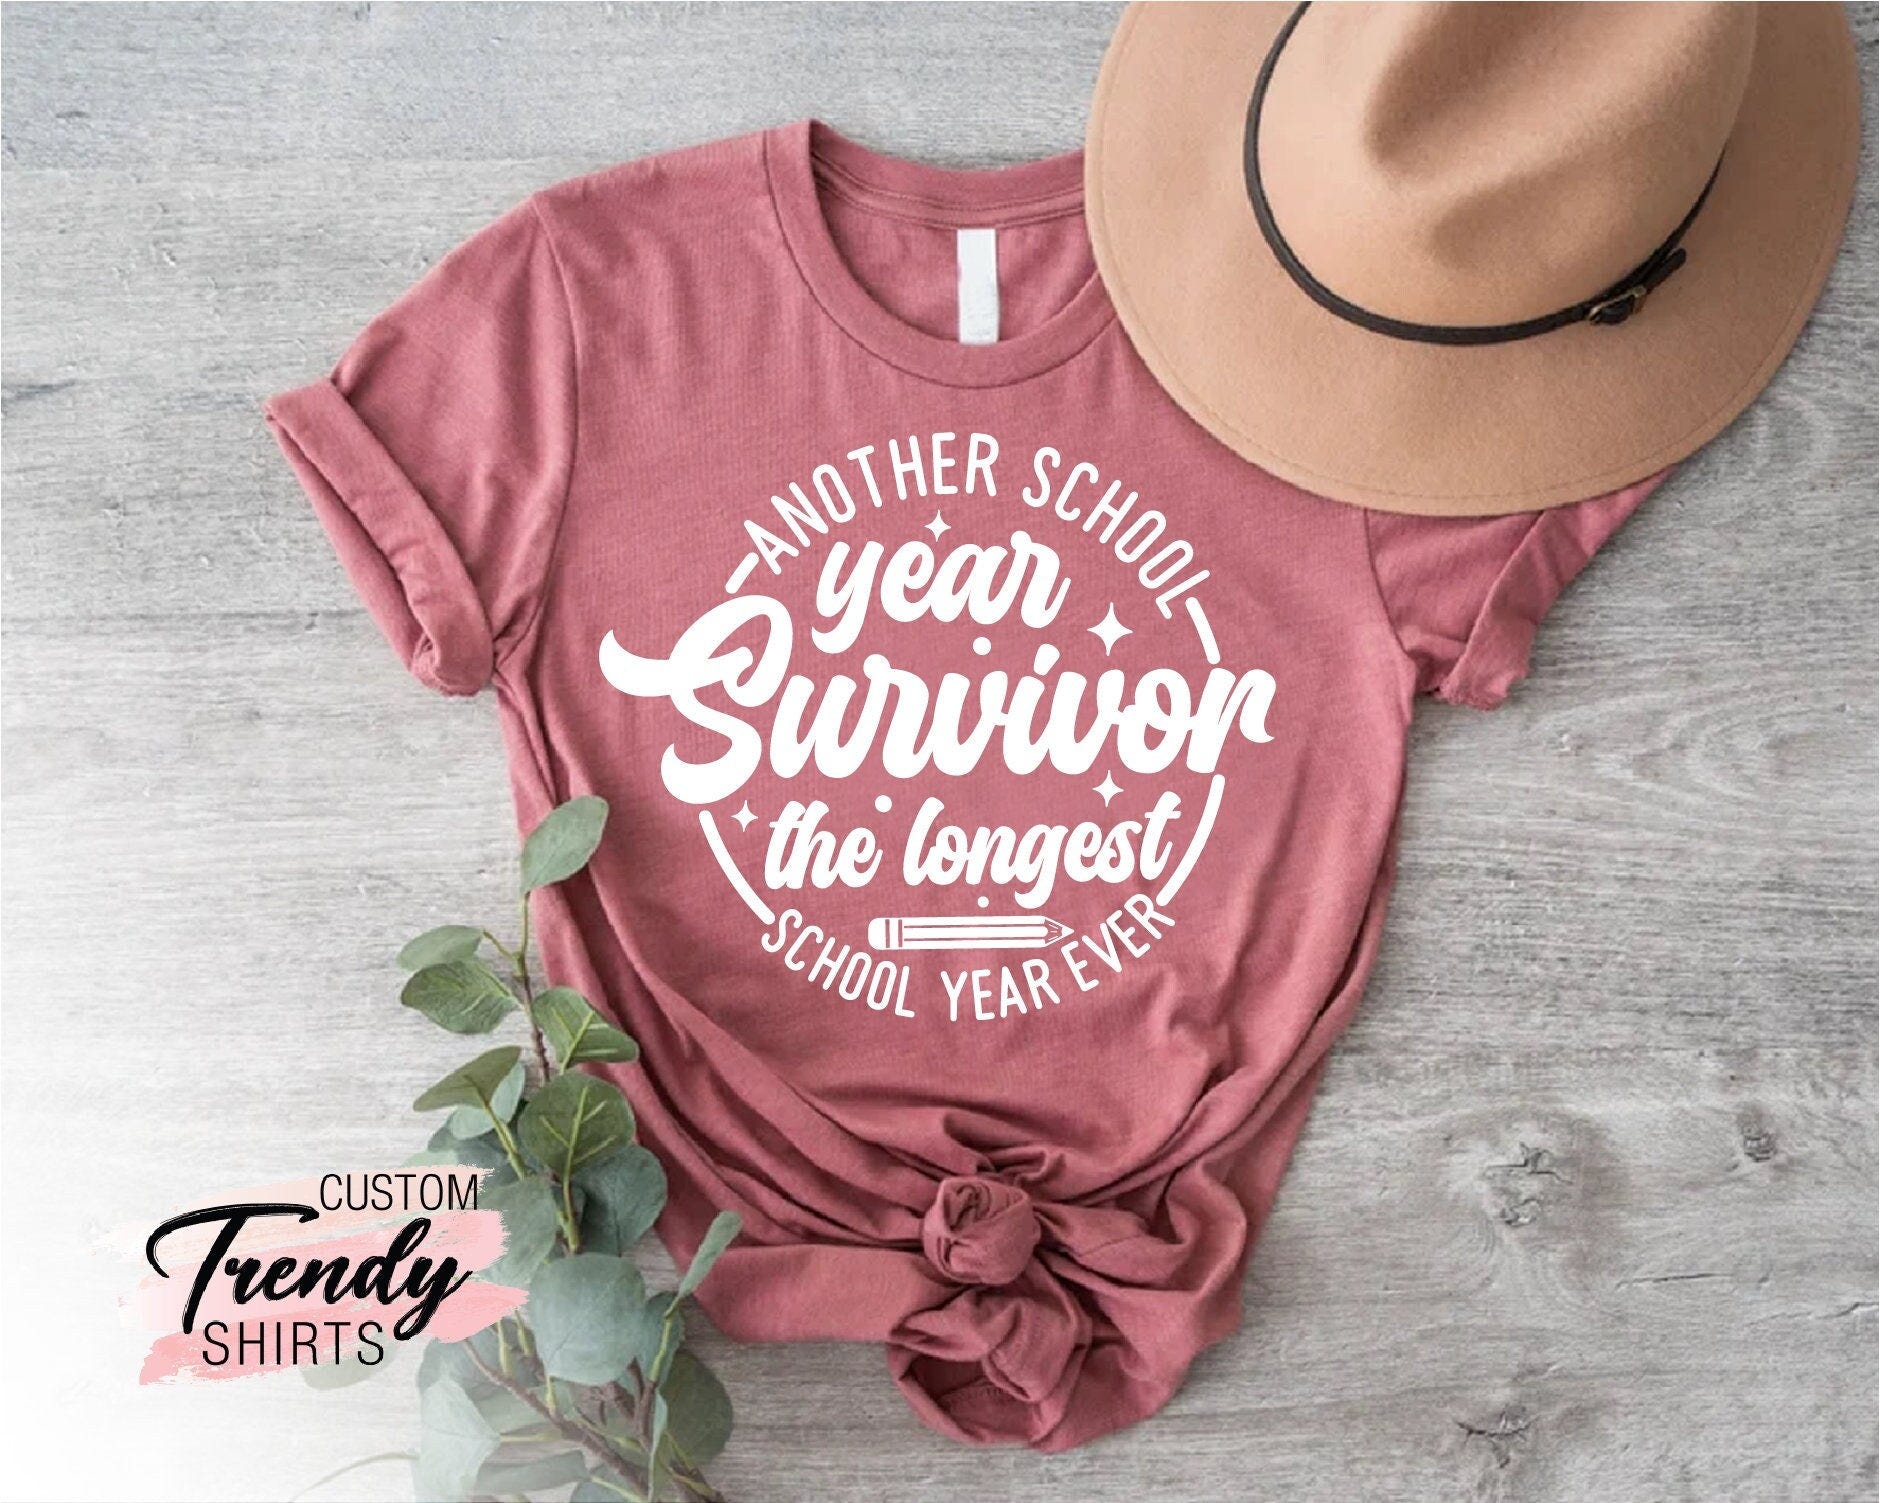 Another School Year Survivor Shirt,Funny Teacher Shirt,Last Day of School Shirt,Teacher Summer Shirt,Kids Teachers Outfit,End of Year Shirt